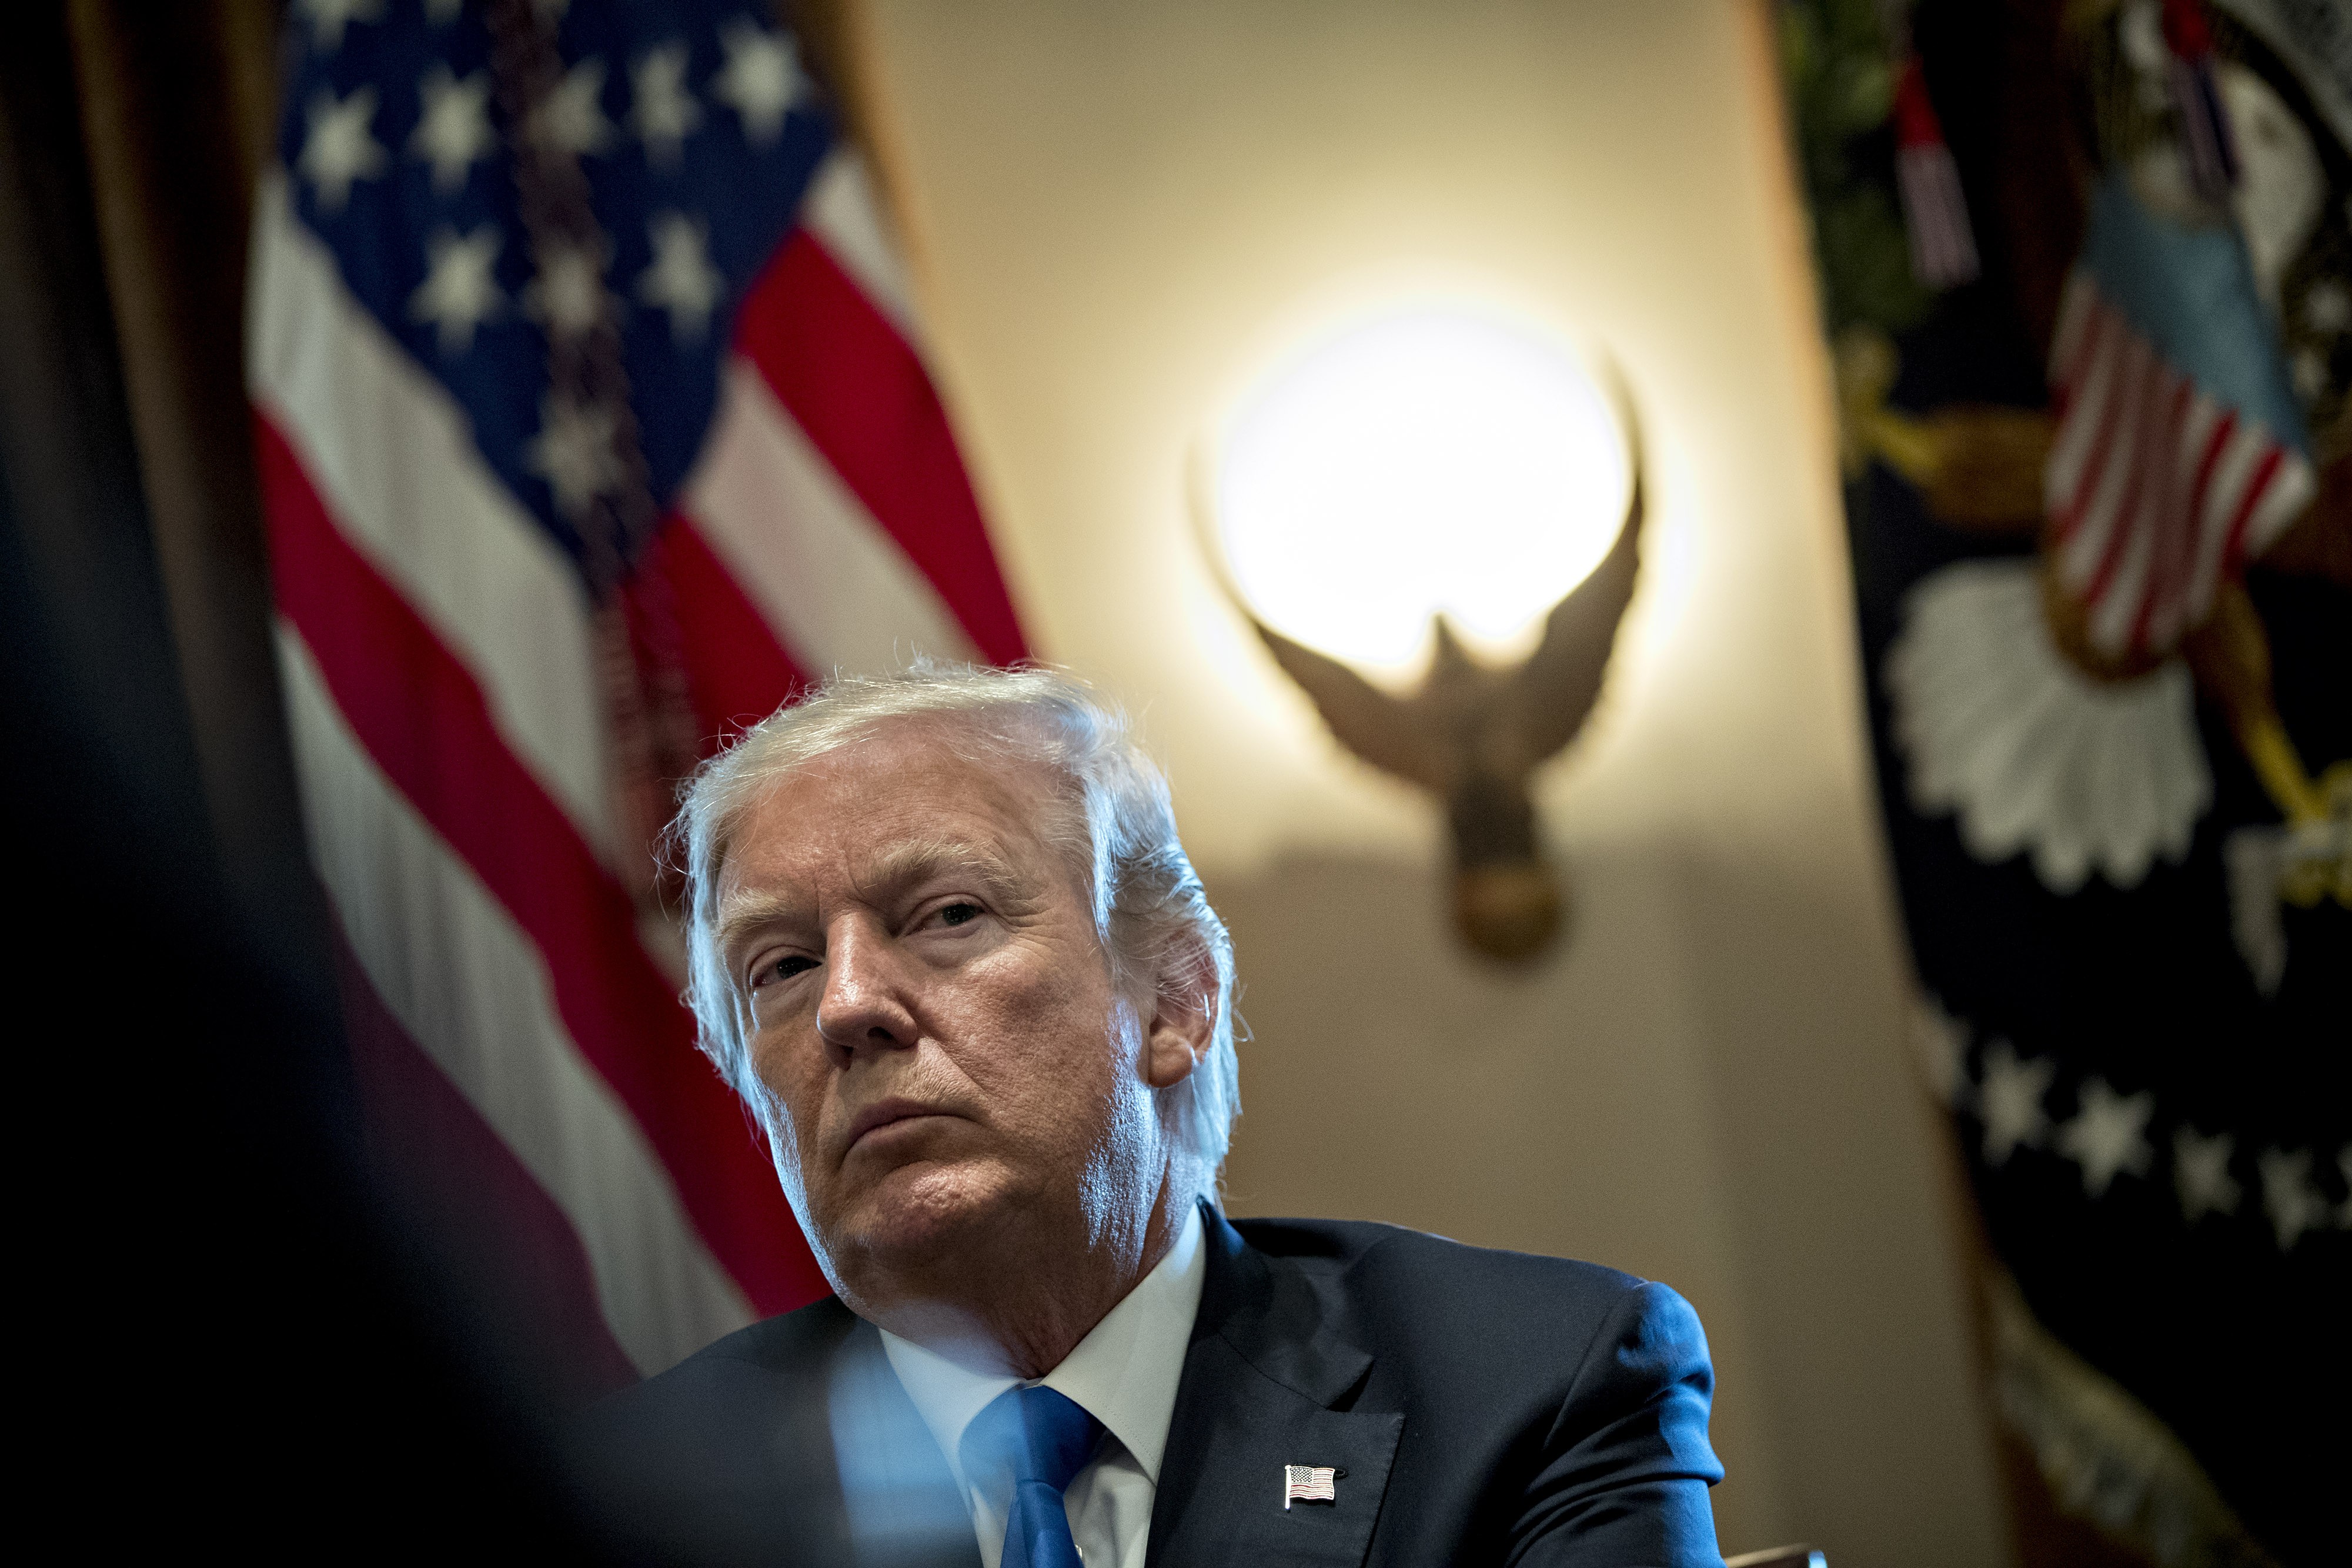 US President Donald Trump’s mixed messages to North Korean leader Kim Jong-un are not by chance, the US has a coherent carrot-and-stick plan to try to deal with the issue. But it could risk many lives in South Korea. Photo: Bloomberg